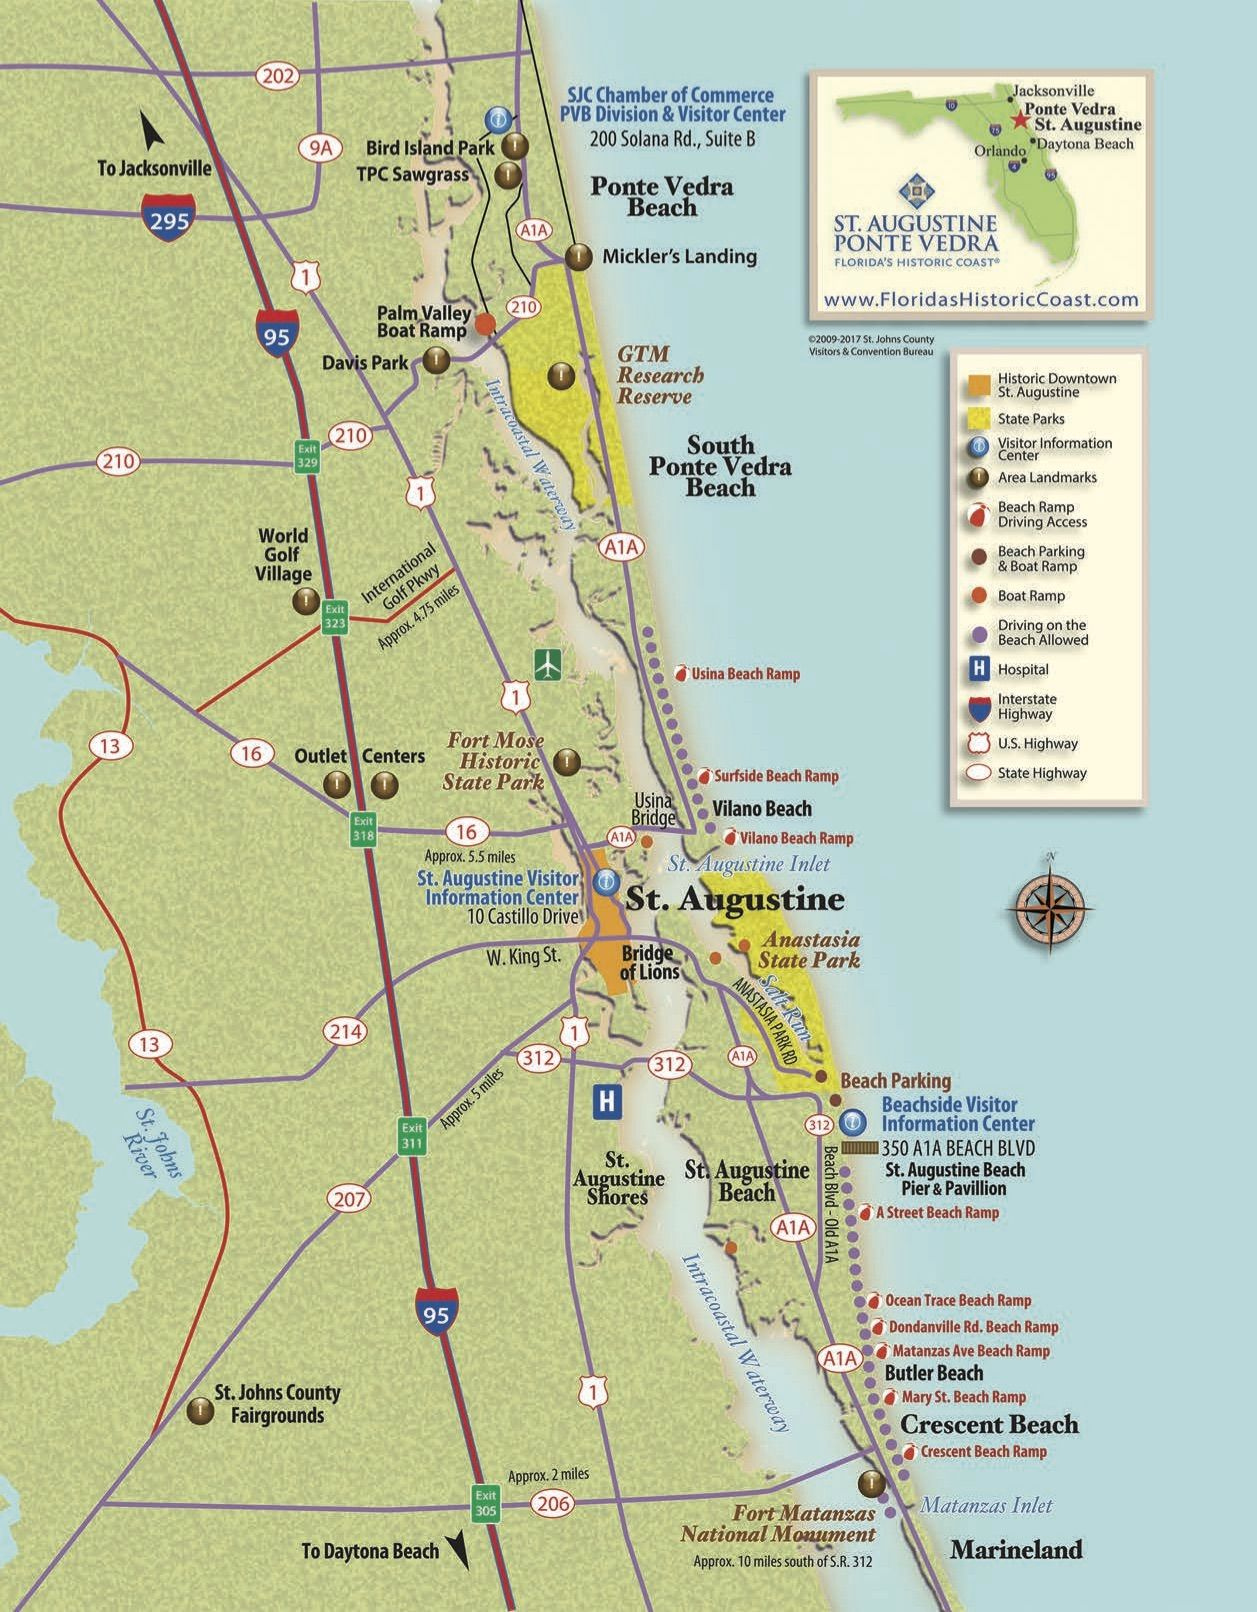 View St Augustine Maps To Familiarize Yourself With St Augustine 